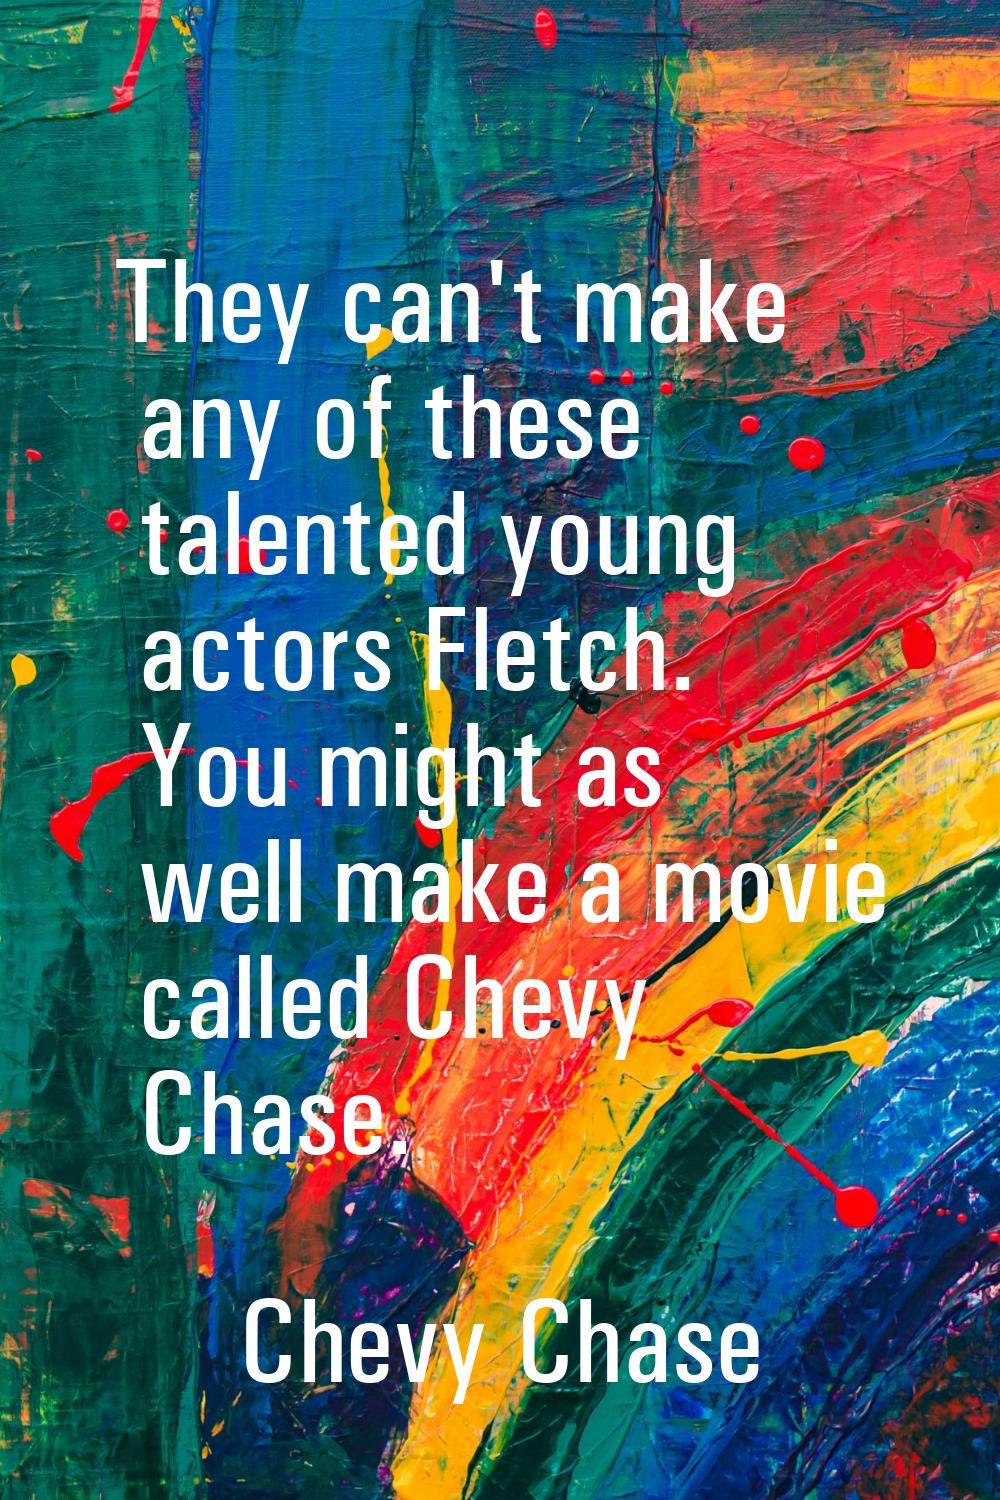 They can't make any of these talented young actors Fletch. You might as well make a movie called Ch